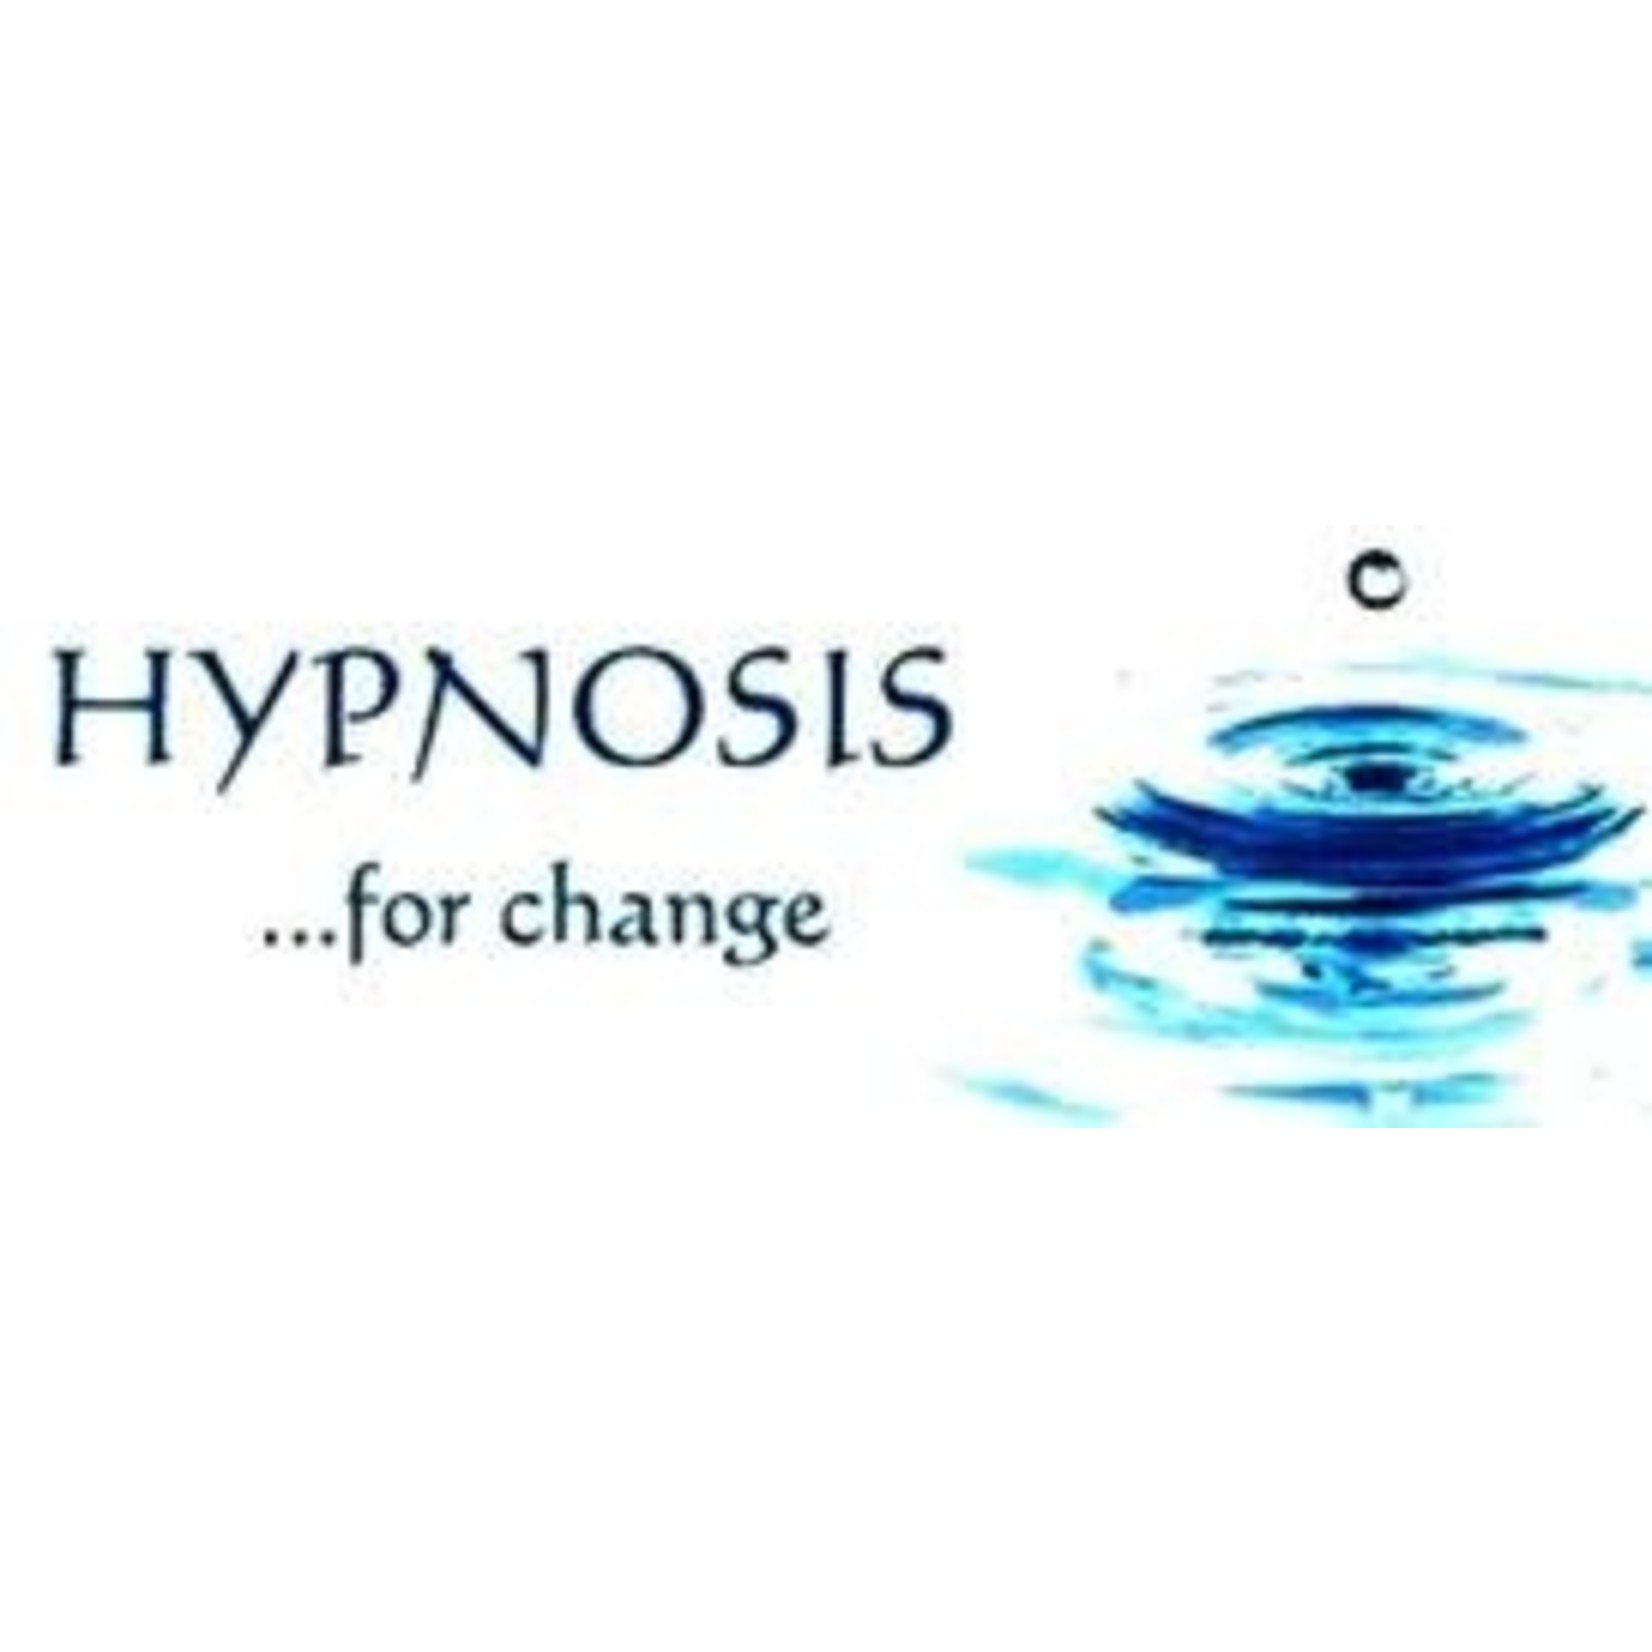 Hypnosis for Change-Joliet Hypnosis for Change-Joliet $150.00 Initial New Client Visit